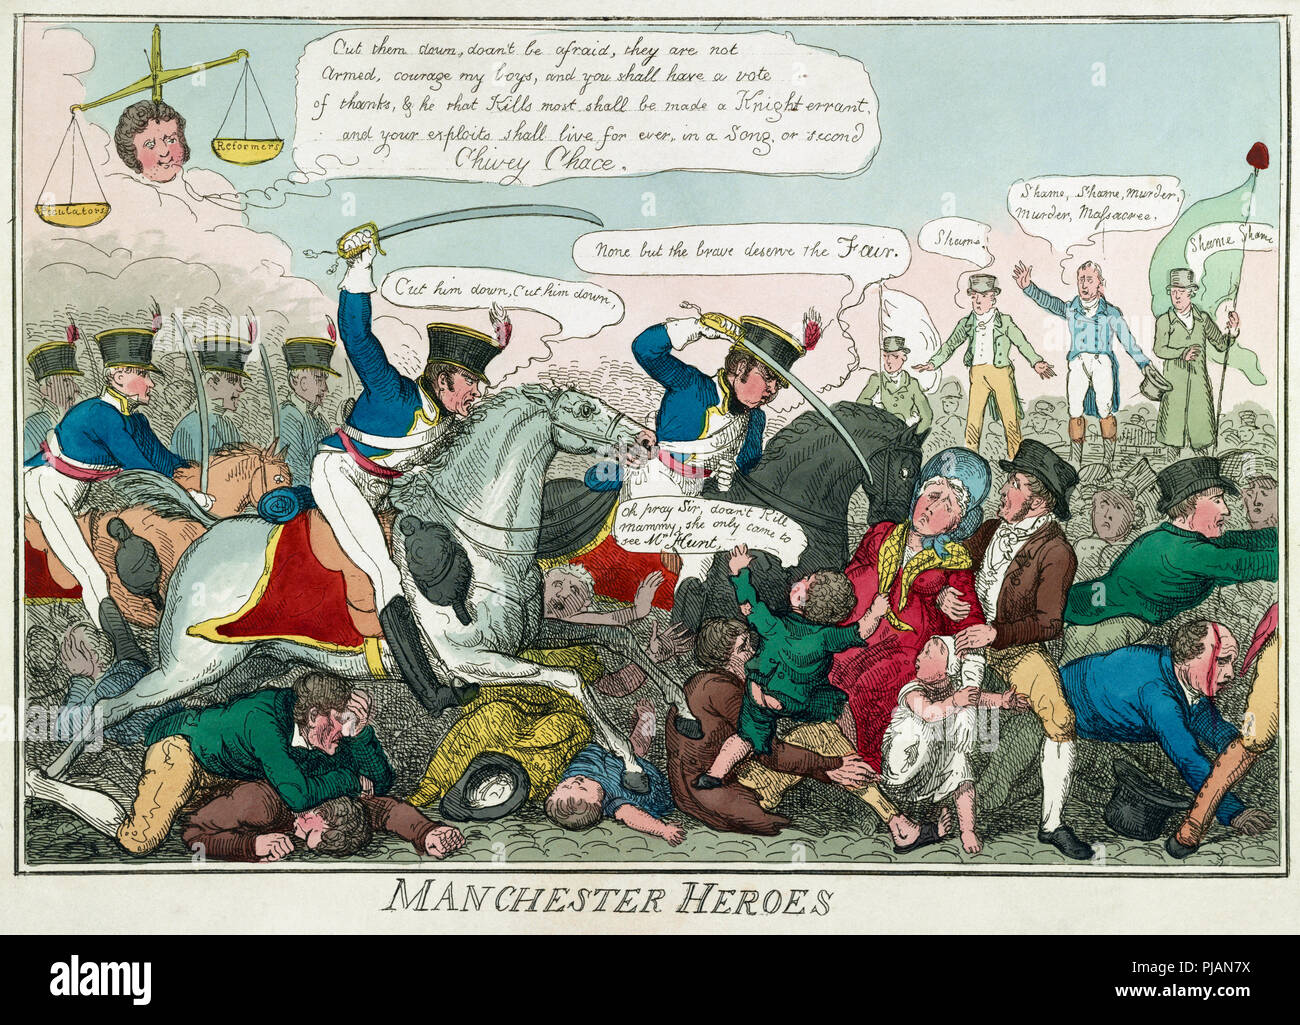 The Peterloo Massacre.  The massacre took place on August 16, 1819 at St Peter’s Field, Manchester, England, when the 15th Hussars, a cavalry regiment, charged with sabres drawn into an unarmed crowd who were demanding reform of parliamentary representation, killing 15 and wounding an estimated 500-plus.  After a contemporary cartoon published 1819. Possibly drawn by Robert Cruikshank. Stock Photo